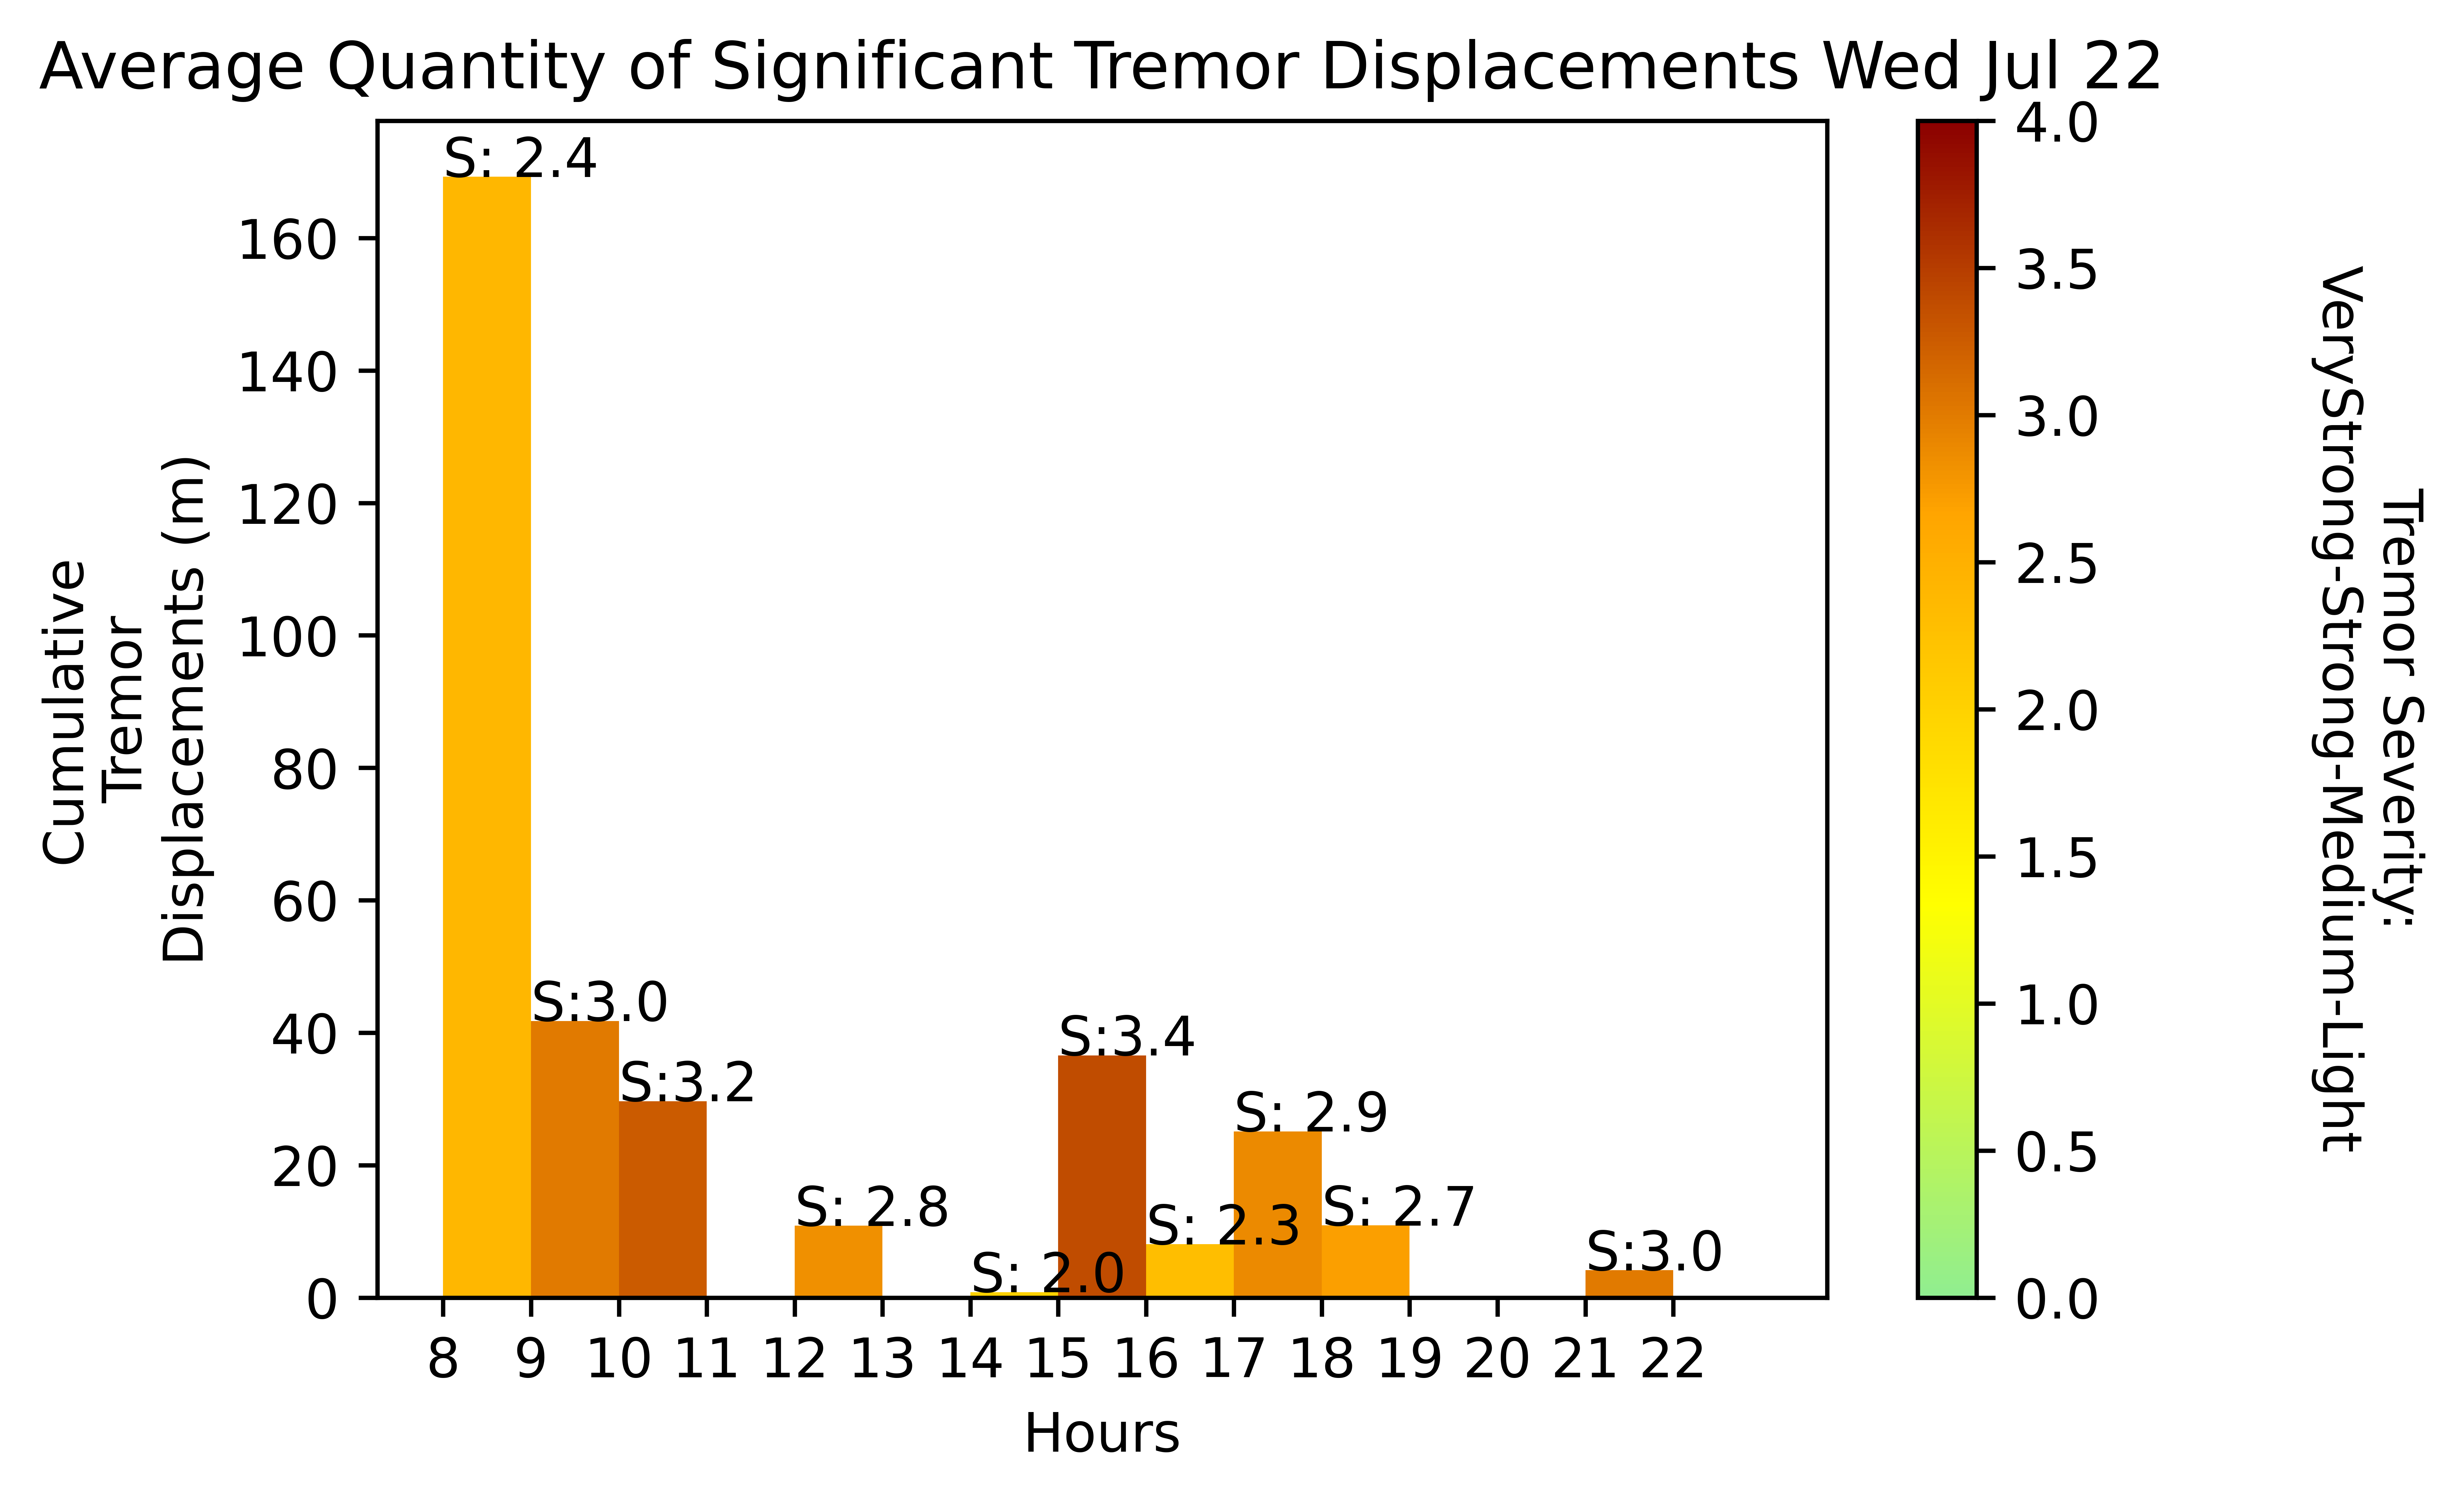 One day data sample from a week long acquisition that allowed us to validate the Tremor severity indicator and improve robustness and ease of use of the system.